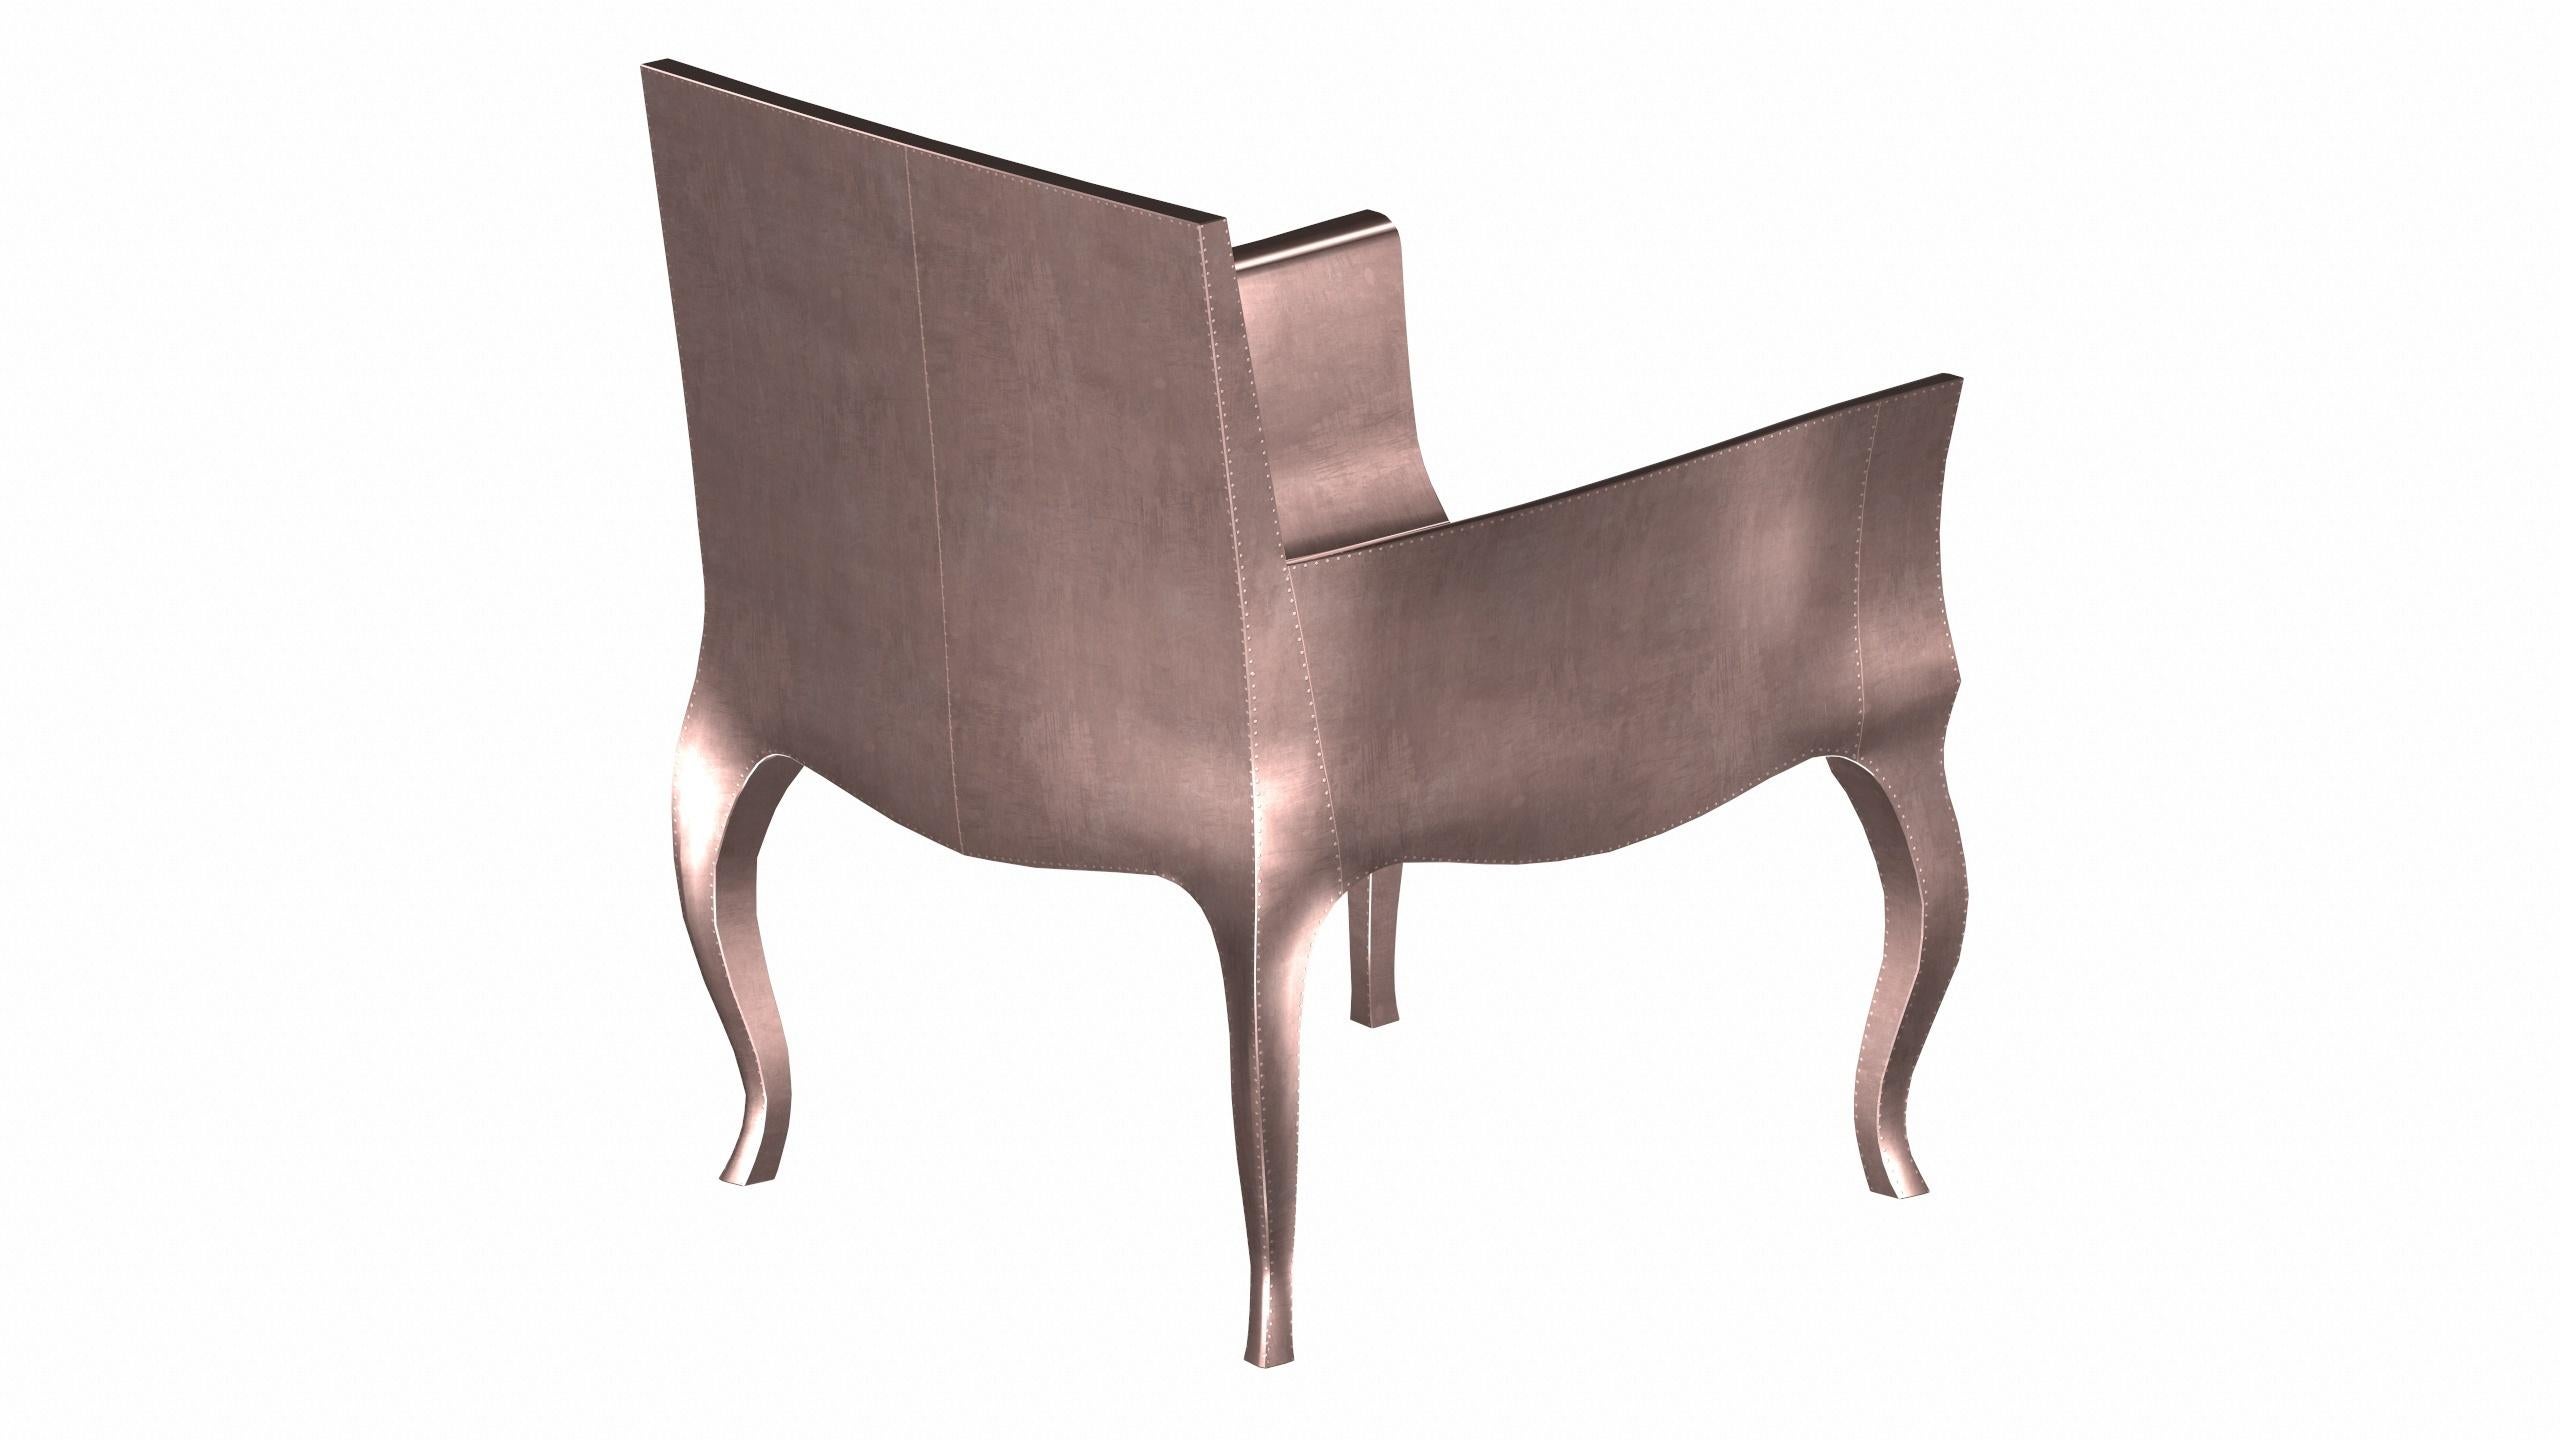 Indian Art Deco Club Chairs in Smooth Copper by Paul Mathieu for S. Odegard For Sale